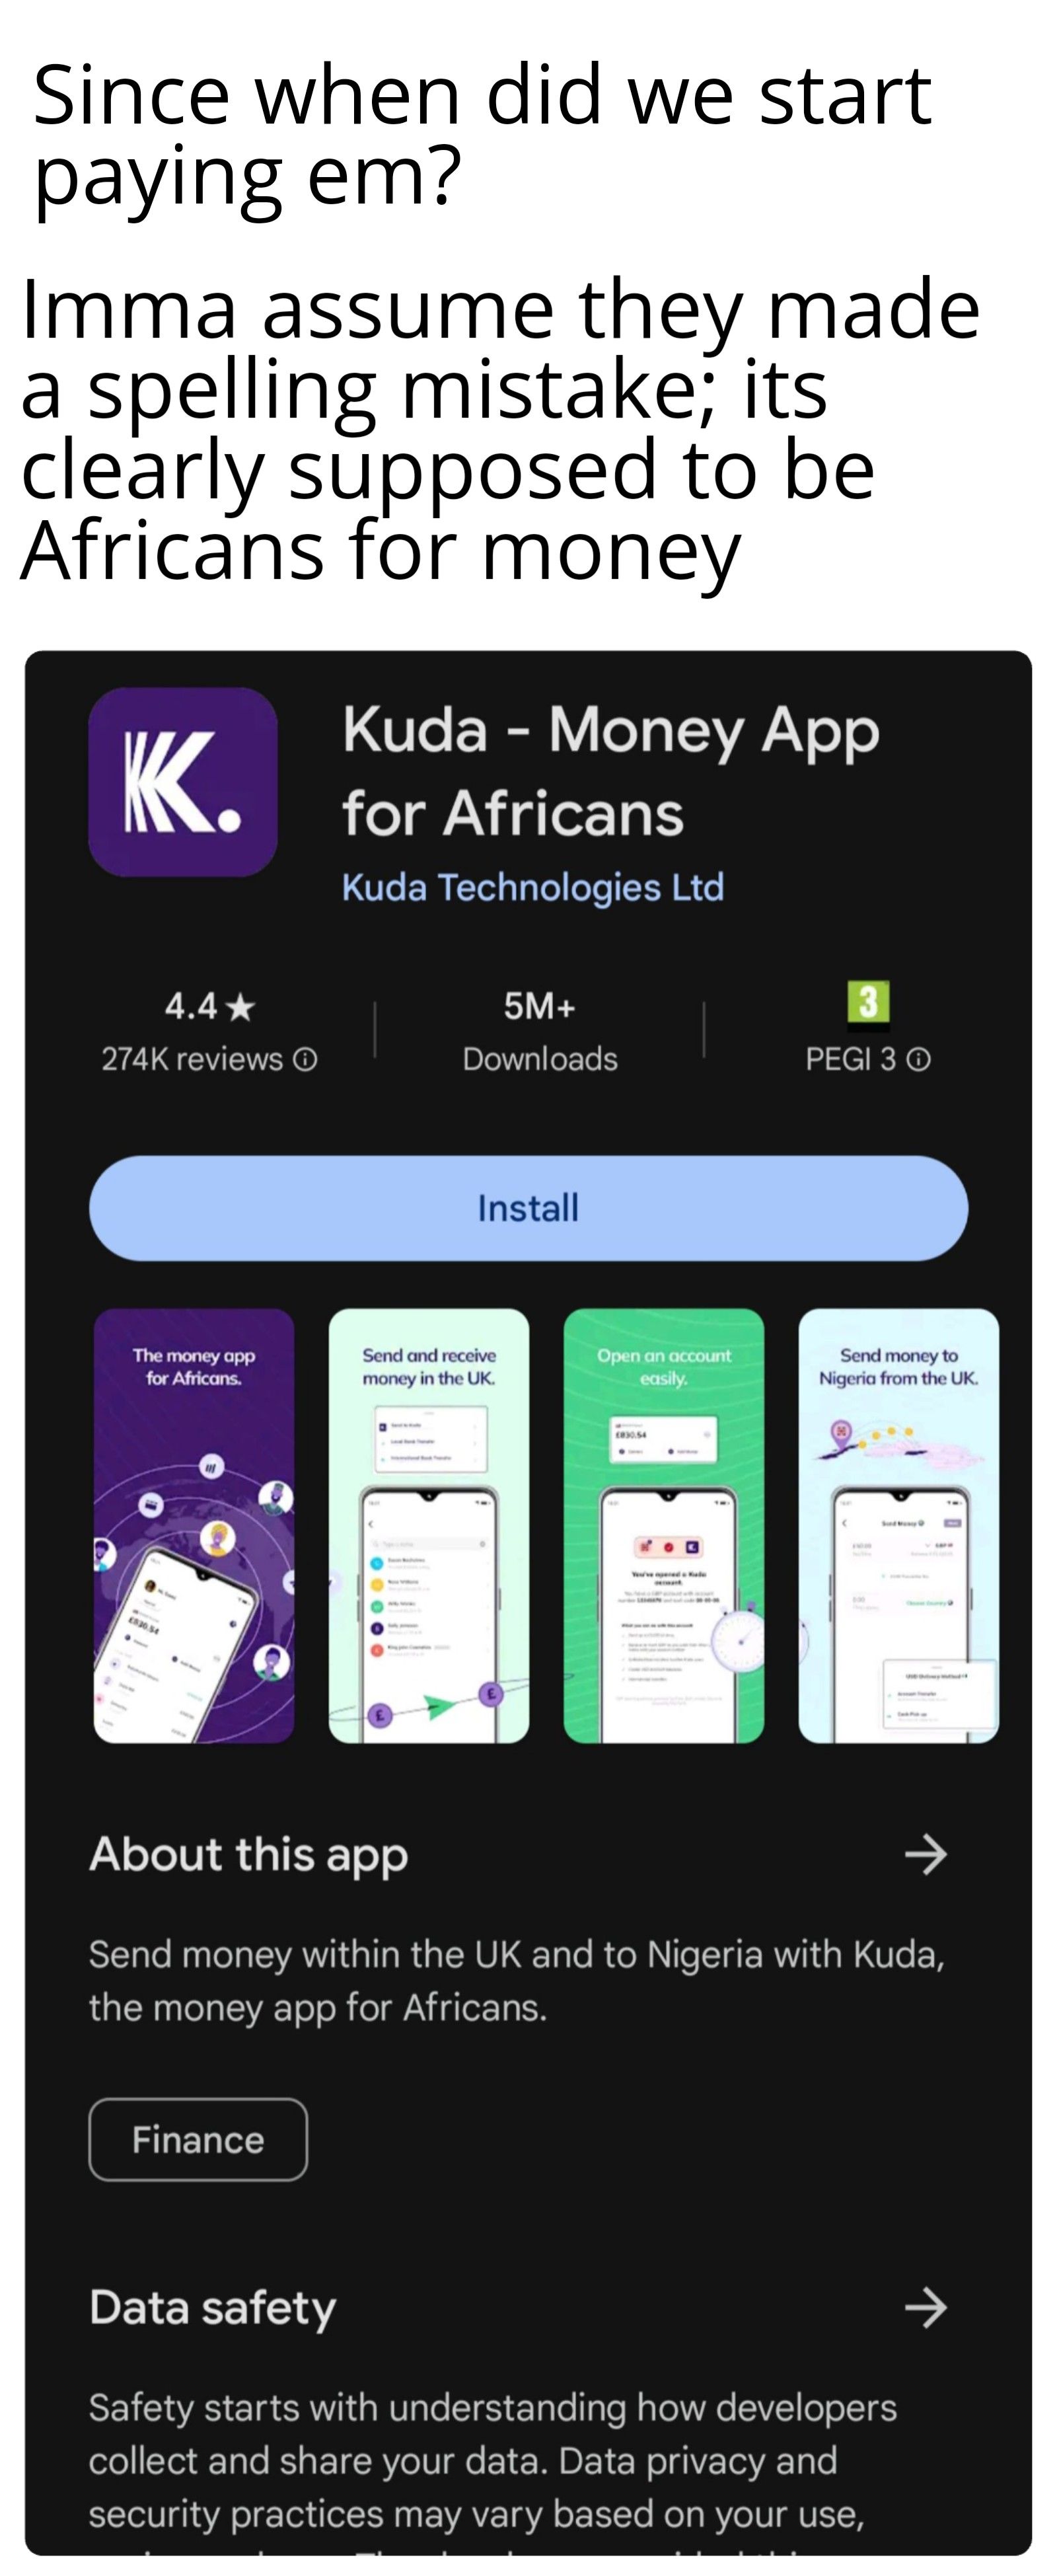 Since when did we start
paying em?
Imma assume they made
a spelling mistake; its
clearly supposed to be
Africans for money
KK.
4.4★
274K reviews Ⓒ
The money app
for Africans.
£830.54
Kuda - Money App
for Africans
Kuda Technologies Ltd
Finance
5M+
Downloads
Install
Send and receive
money in the UK.
Open an account
easily.
PEGI 3 Ⓒ
Send money to
Nigeria from the UK.
About this app
Send money within the UK and to Nigeria with Kuda,
the money app for Africans.
Data safety
Safety starts with understanding how developers
collect and share your data. Data privacy and
security practices may vary based on your use,
↑
기